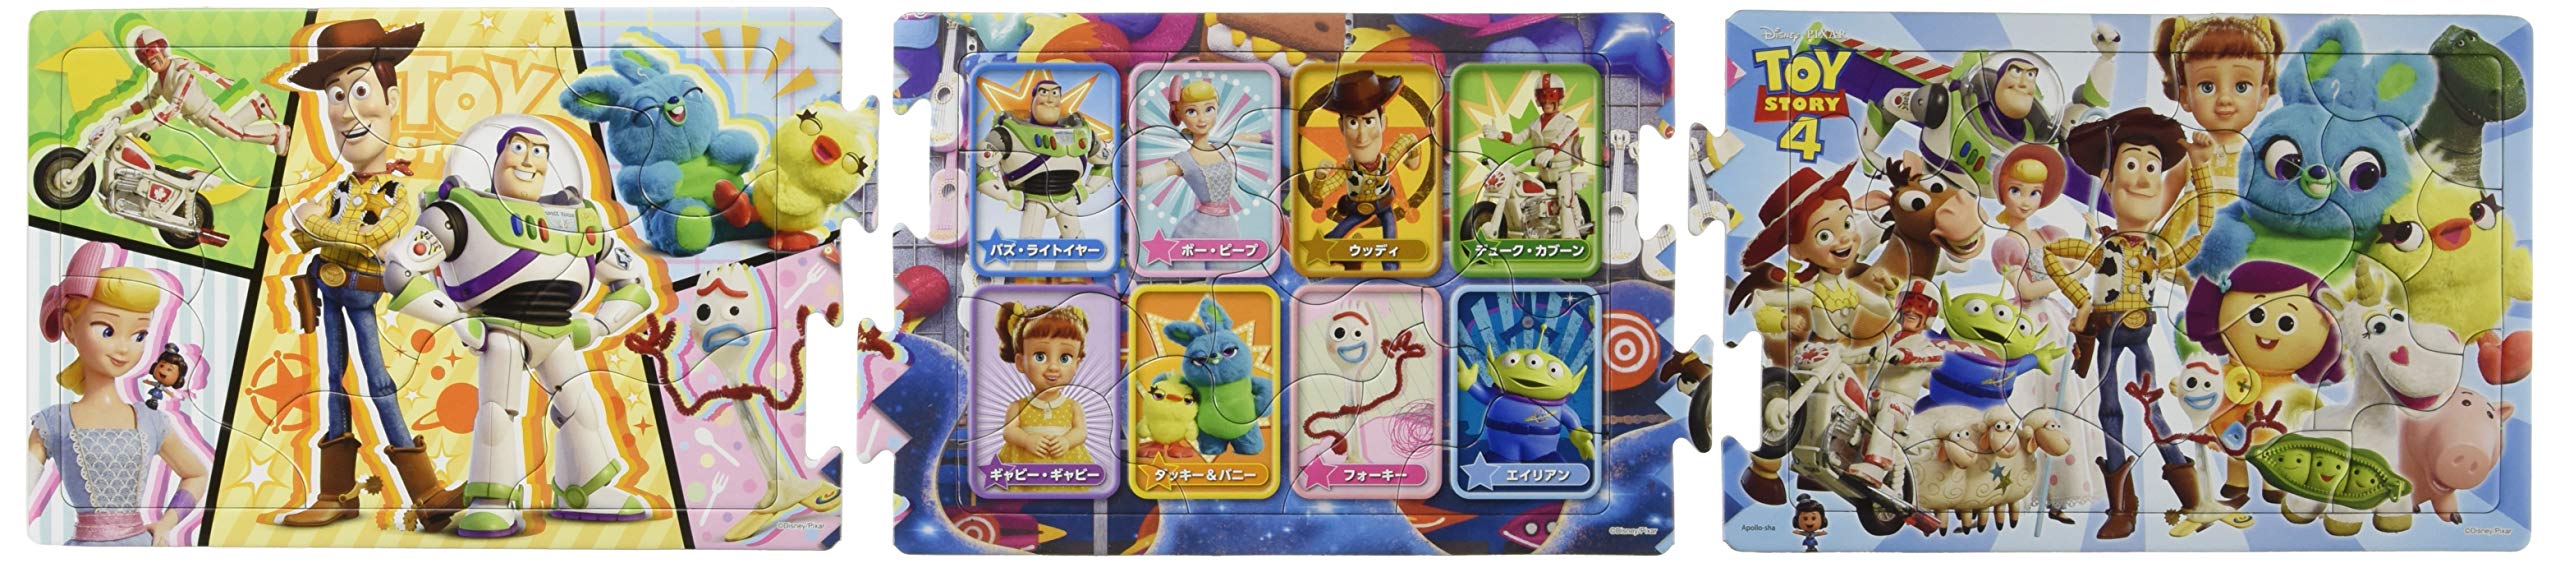 10+15+20 Piece Puzzle For Kids Step 2 Toy Story4 Toy Story 4 [Step Panorama Puzzle]